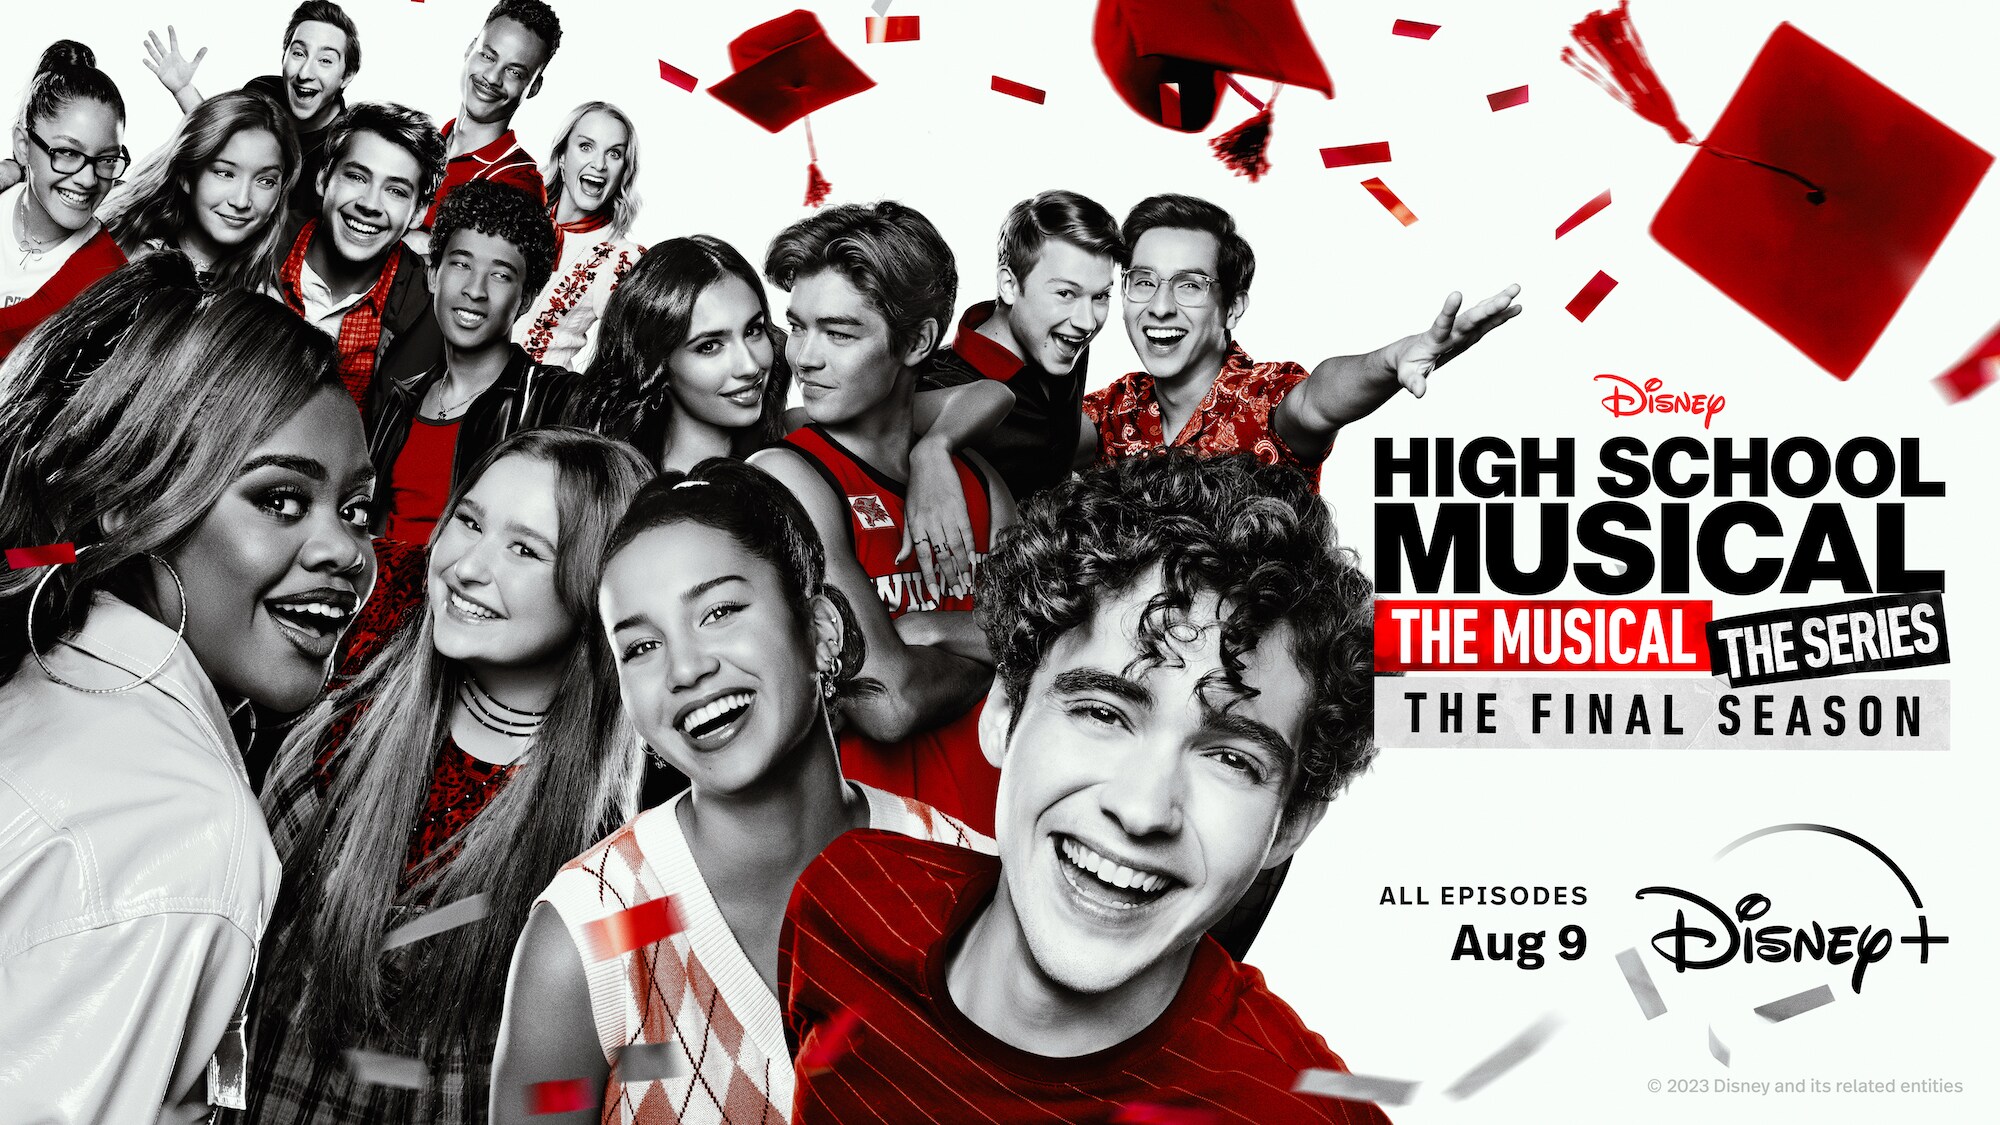 It’s Now Or Never! Disney+ Reveals Official Trailer Of “High School Musical: The Musical: The Series” Season Four Ahead Of Highly Anticipated August 9 Premiere